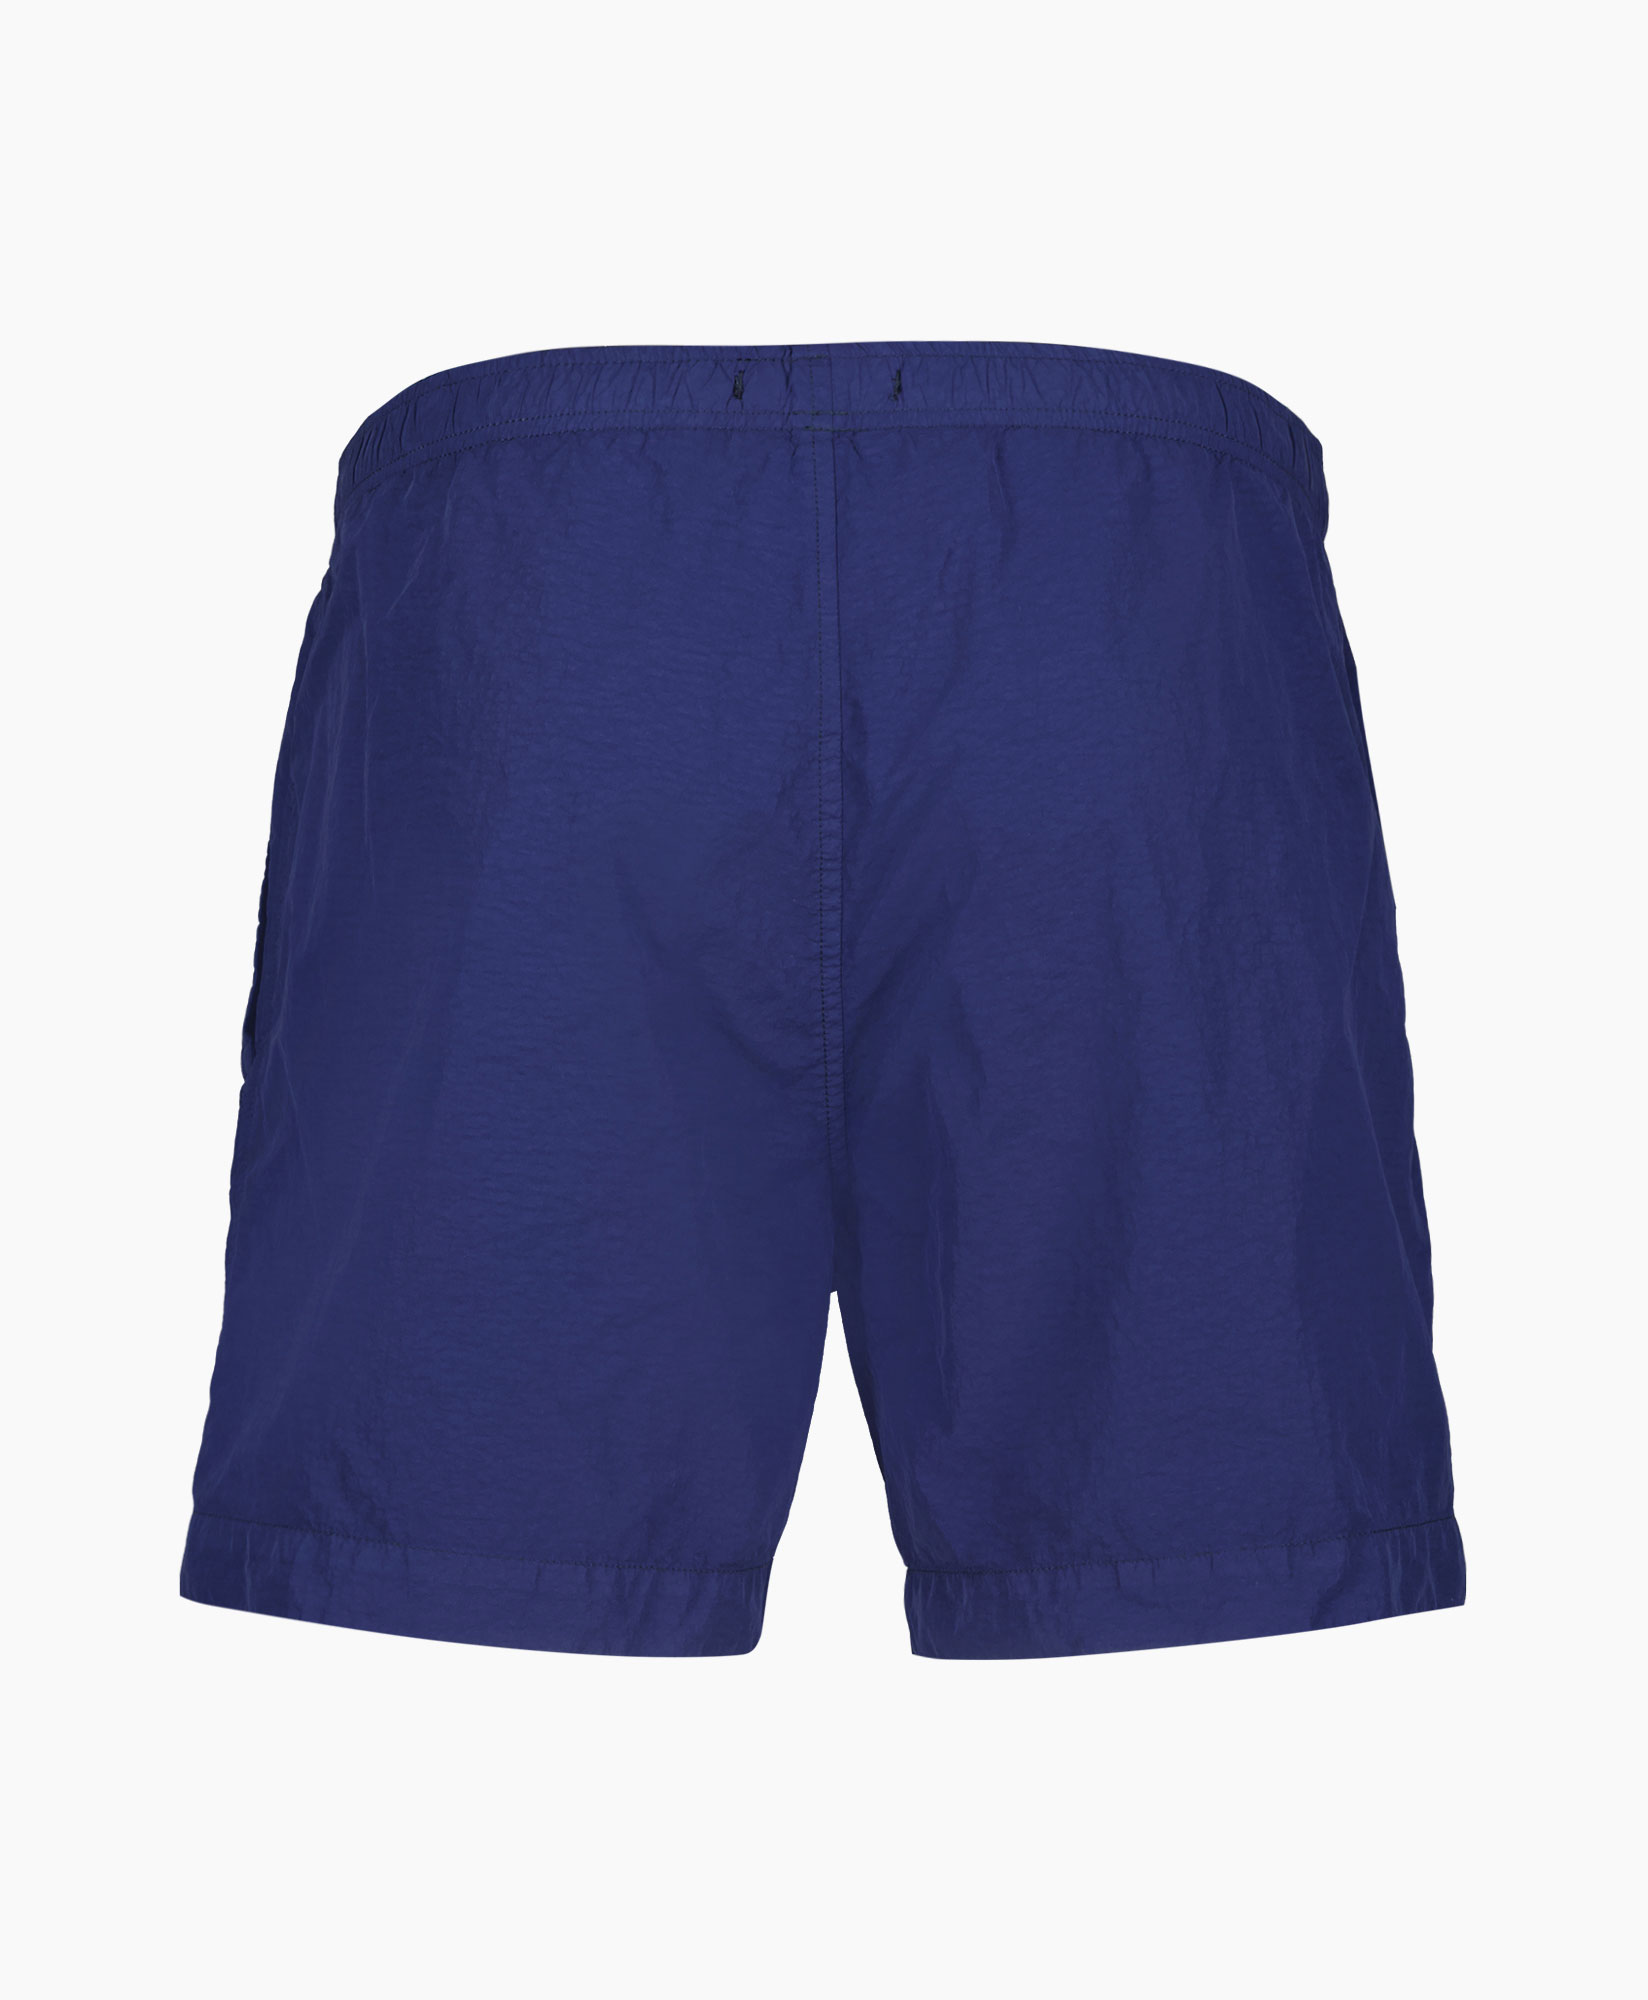 Cp Company Zwembroek 14cmbw006a-005991 Donker Blauw